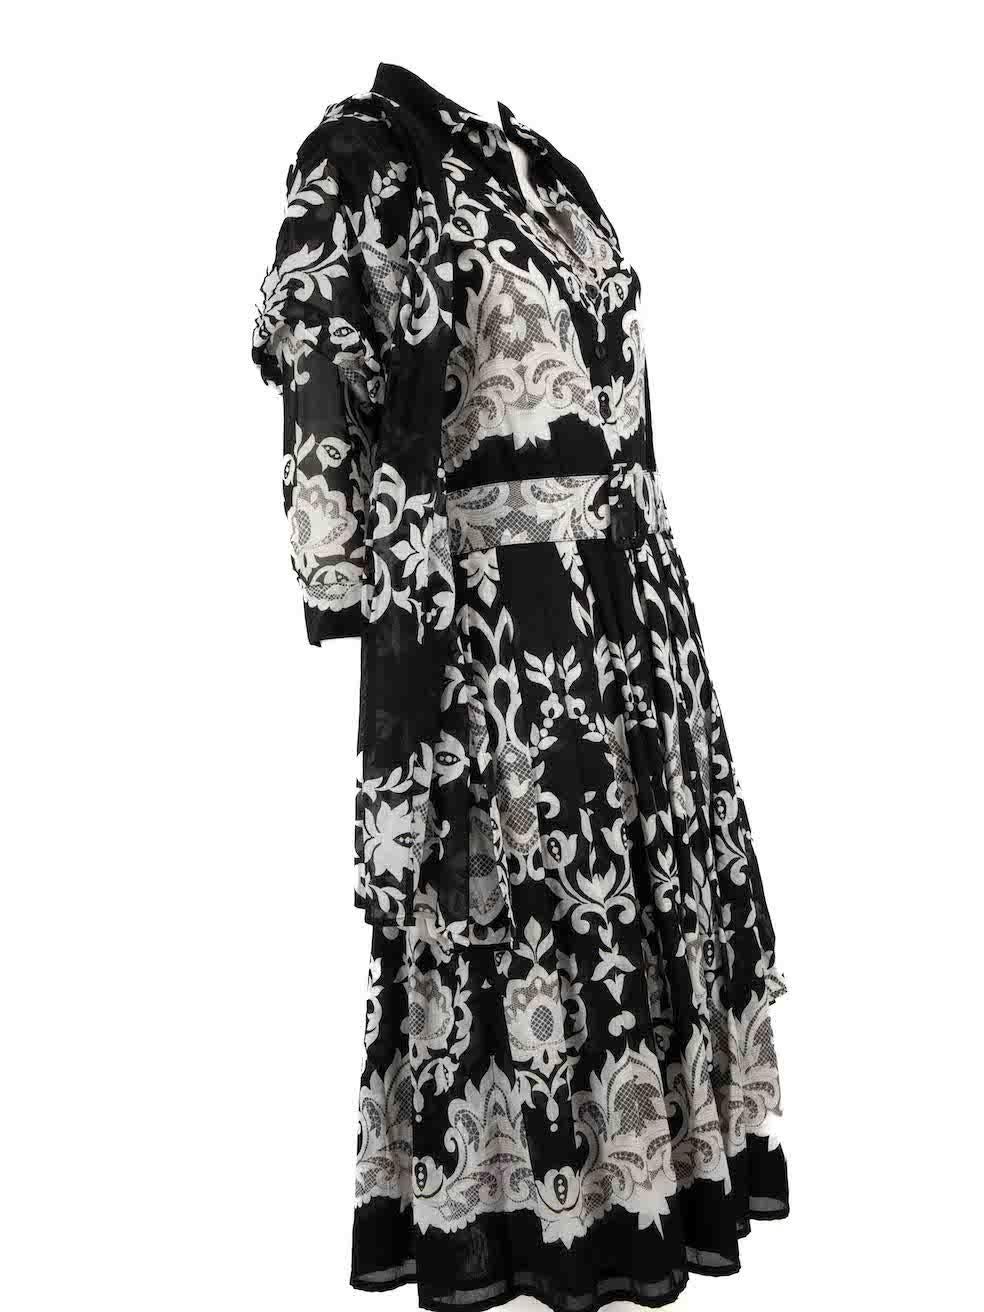 CONDITION is Very good. Hardly any visible wear to dress is evident on this used Samantha Sung designer resale item. This item comes with matching shawl.
 
 Details
 Black
 Cotton
 Midi dress
 Spring pattern
 Front button up closure
 Mid length